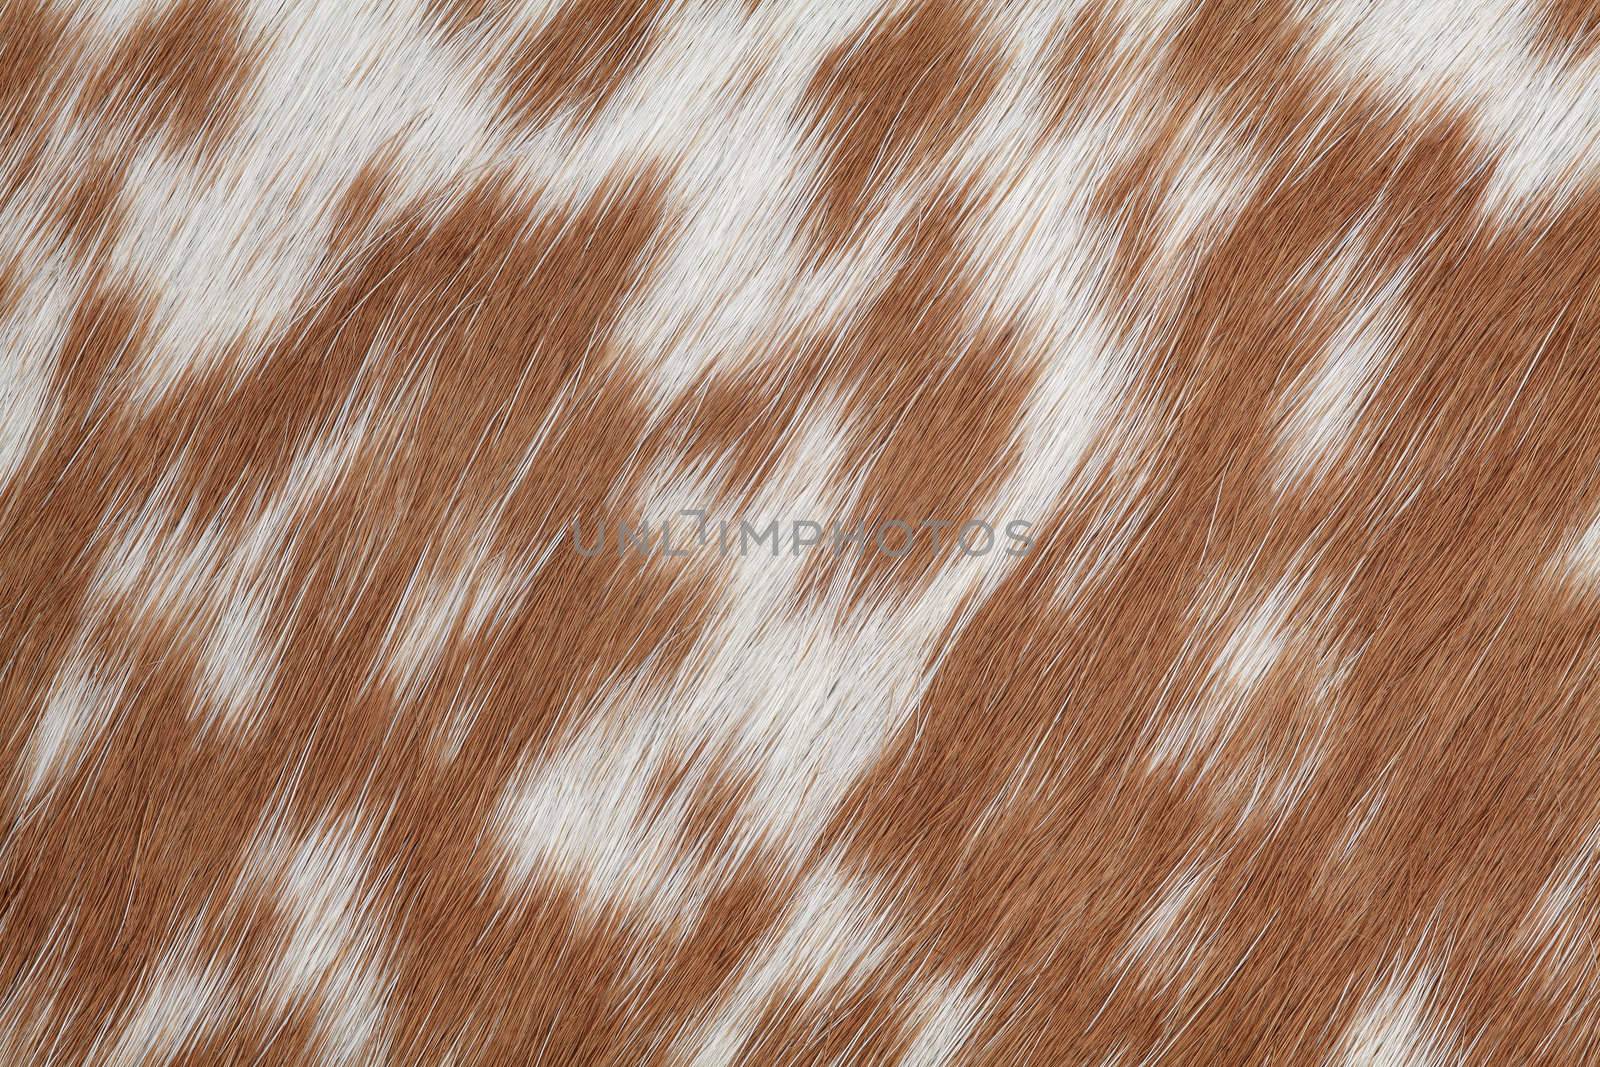 Macro photo of real brown and white cowhide.